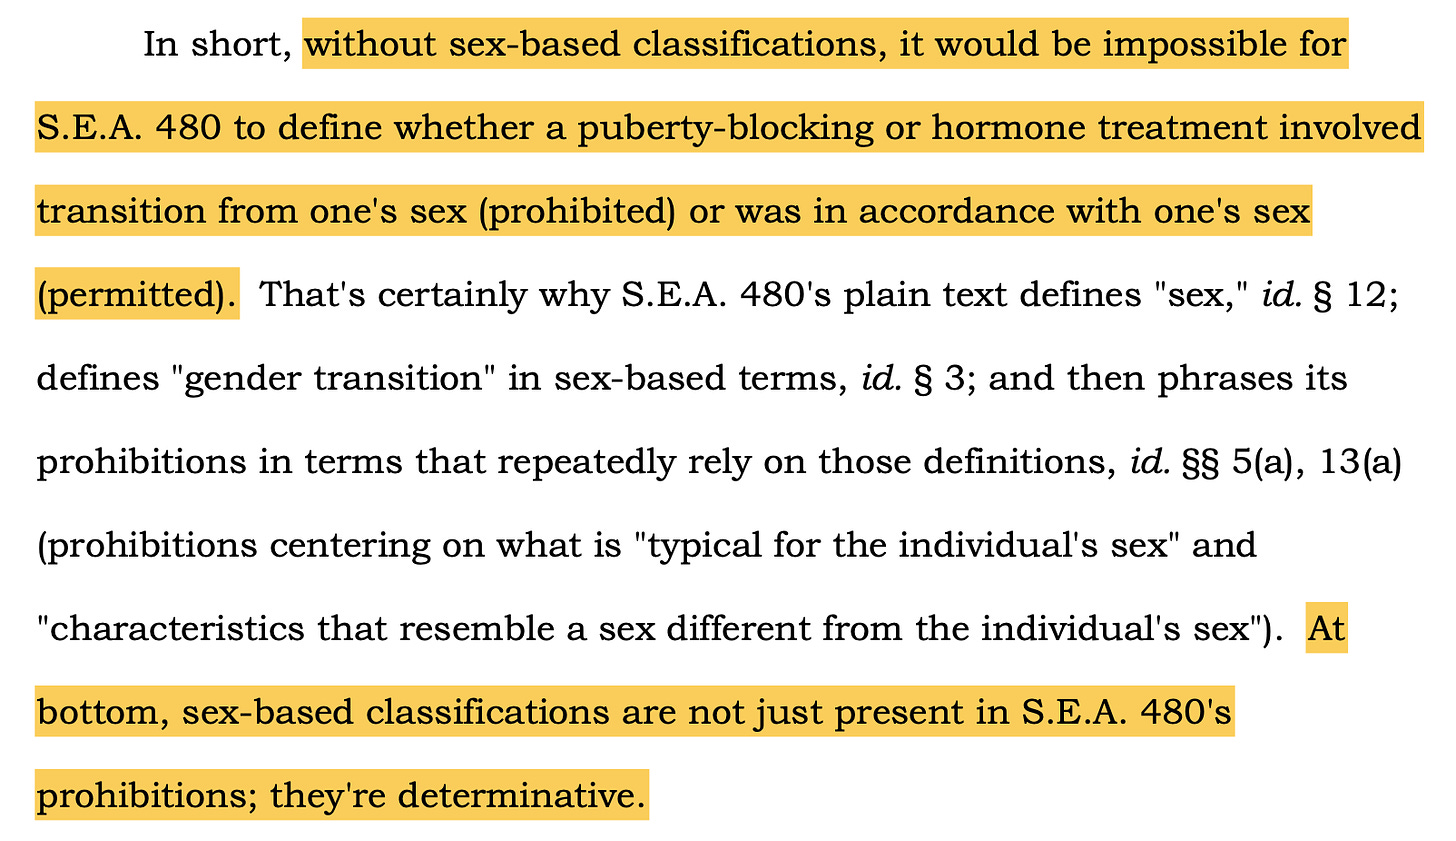 In short, without sex-based classifications, it would be impossible for S.E.A. 480 to define whether a puberty-blocking or hormone treatment involved transition from one's sex (prohibited) or was in accordance with one's sex (permitted). That's certainly why S.E.A. 480's plain text defines "sex," id. § 12; defines "gender transition" in sex-based terms, id. § 3; and then phrases its prohibitions in terms that repeatedly rely on those definitions, id. §§ 5(a), 13(a) (prohibitions centering on what is "typical for the individual's sex" and "characteristics that resemble a sex different from the individual's sex"). At bottom, sex-based classifications are not just present in S.E.A. 480's prohibitions; they're determinative.